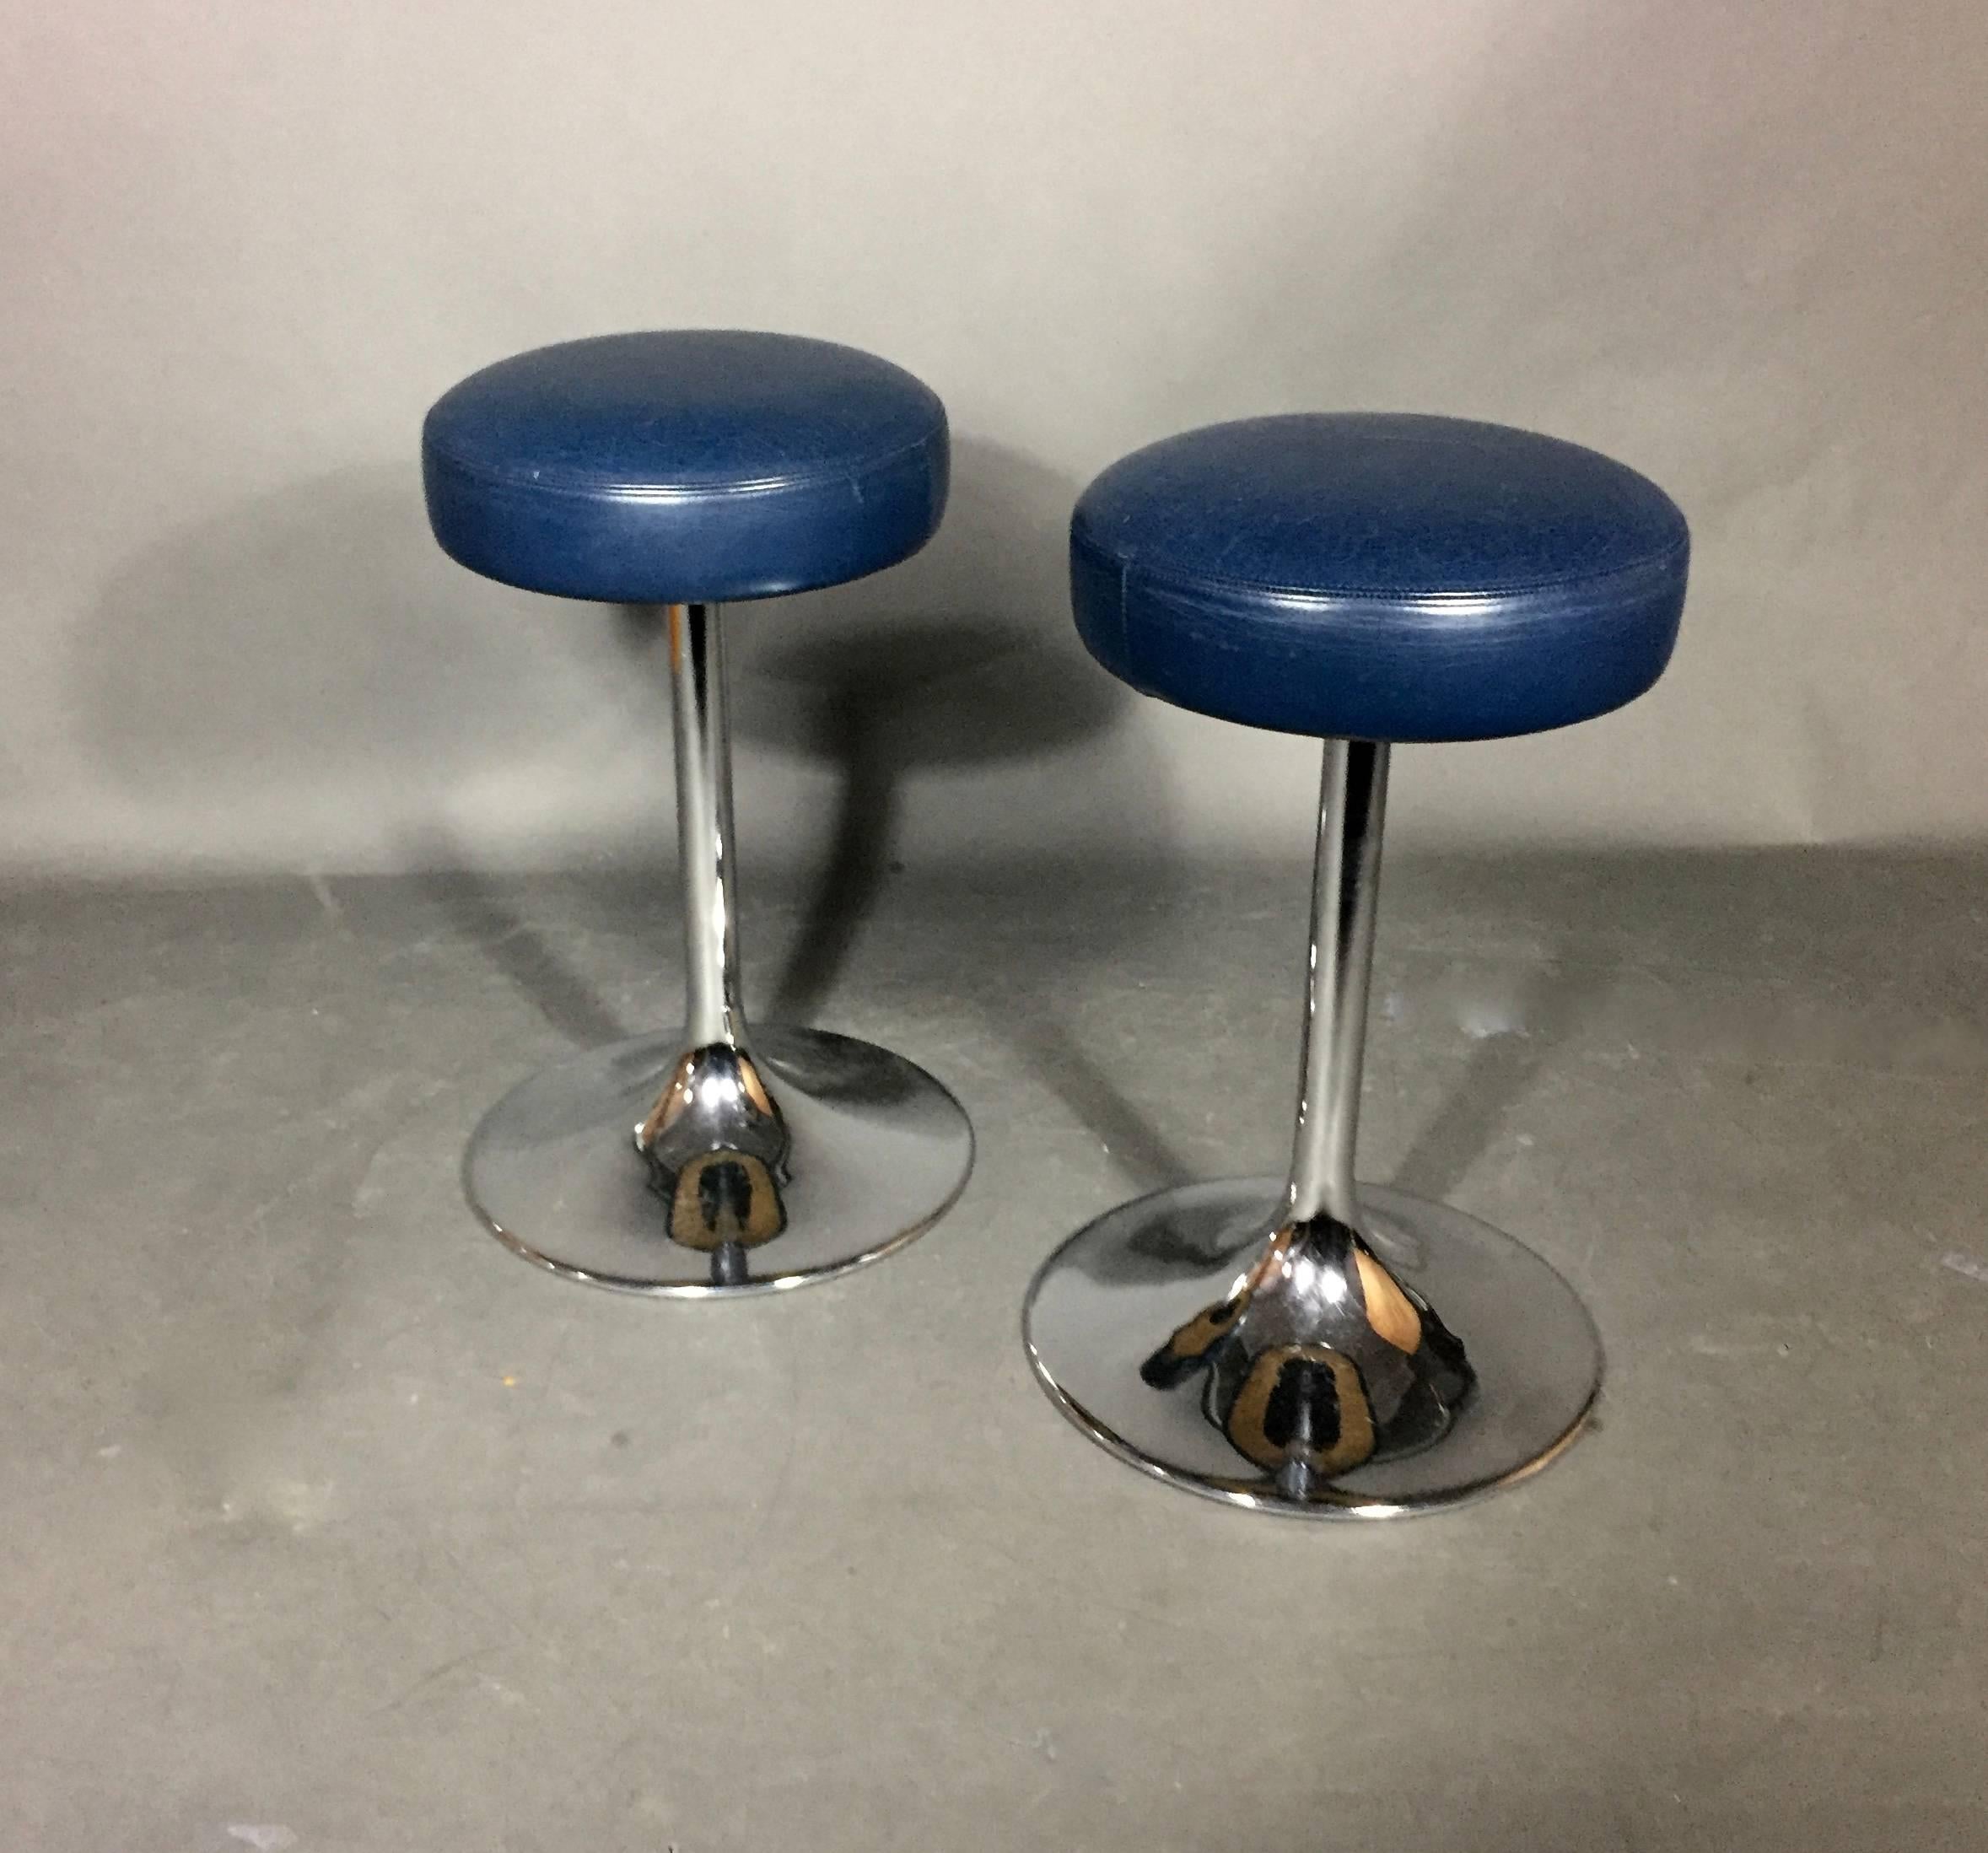 Pair of Johanson Design Chrome and Leather Stools, Sweden, 1970s For Sale 2